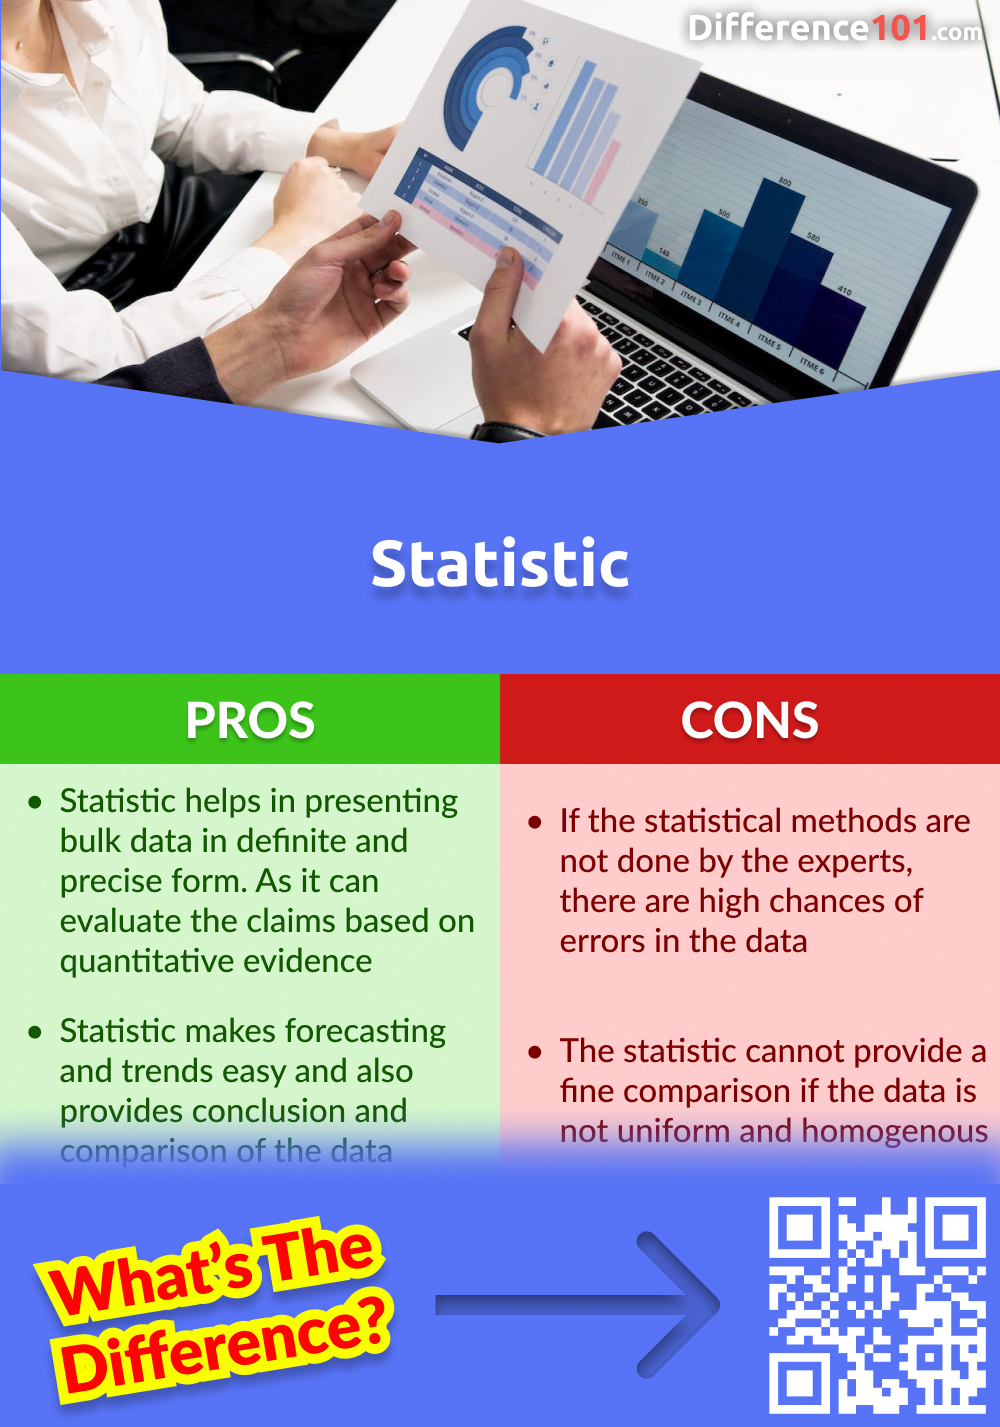 Statistic Pros and Cons